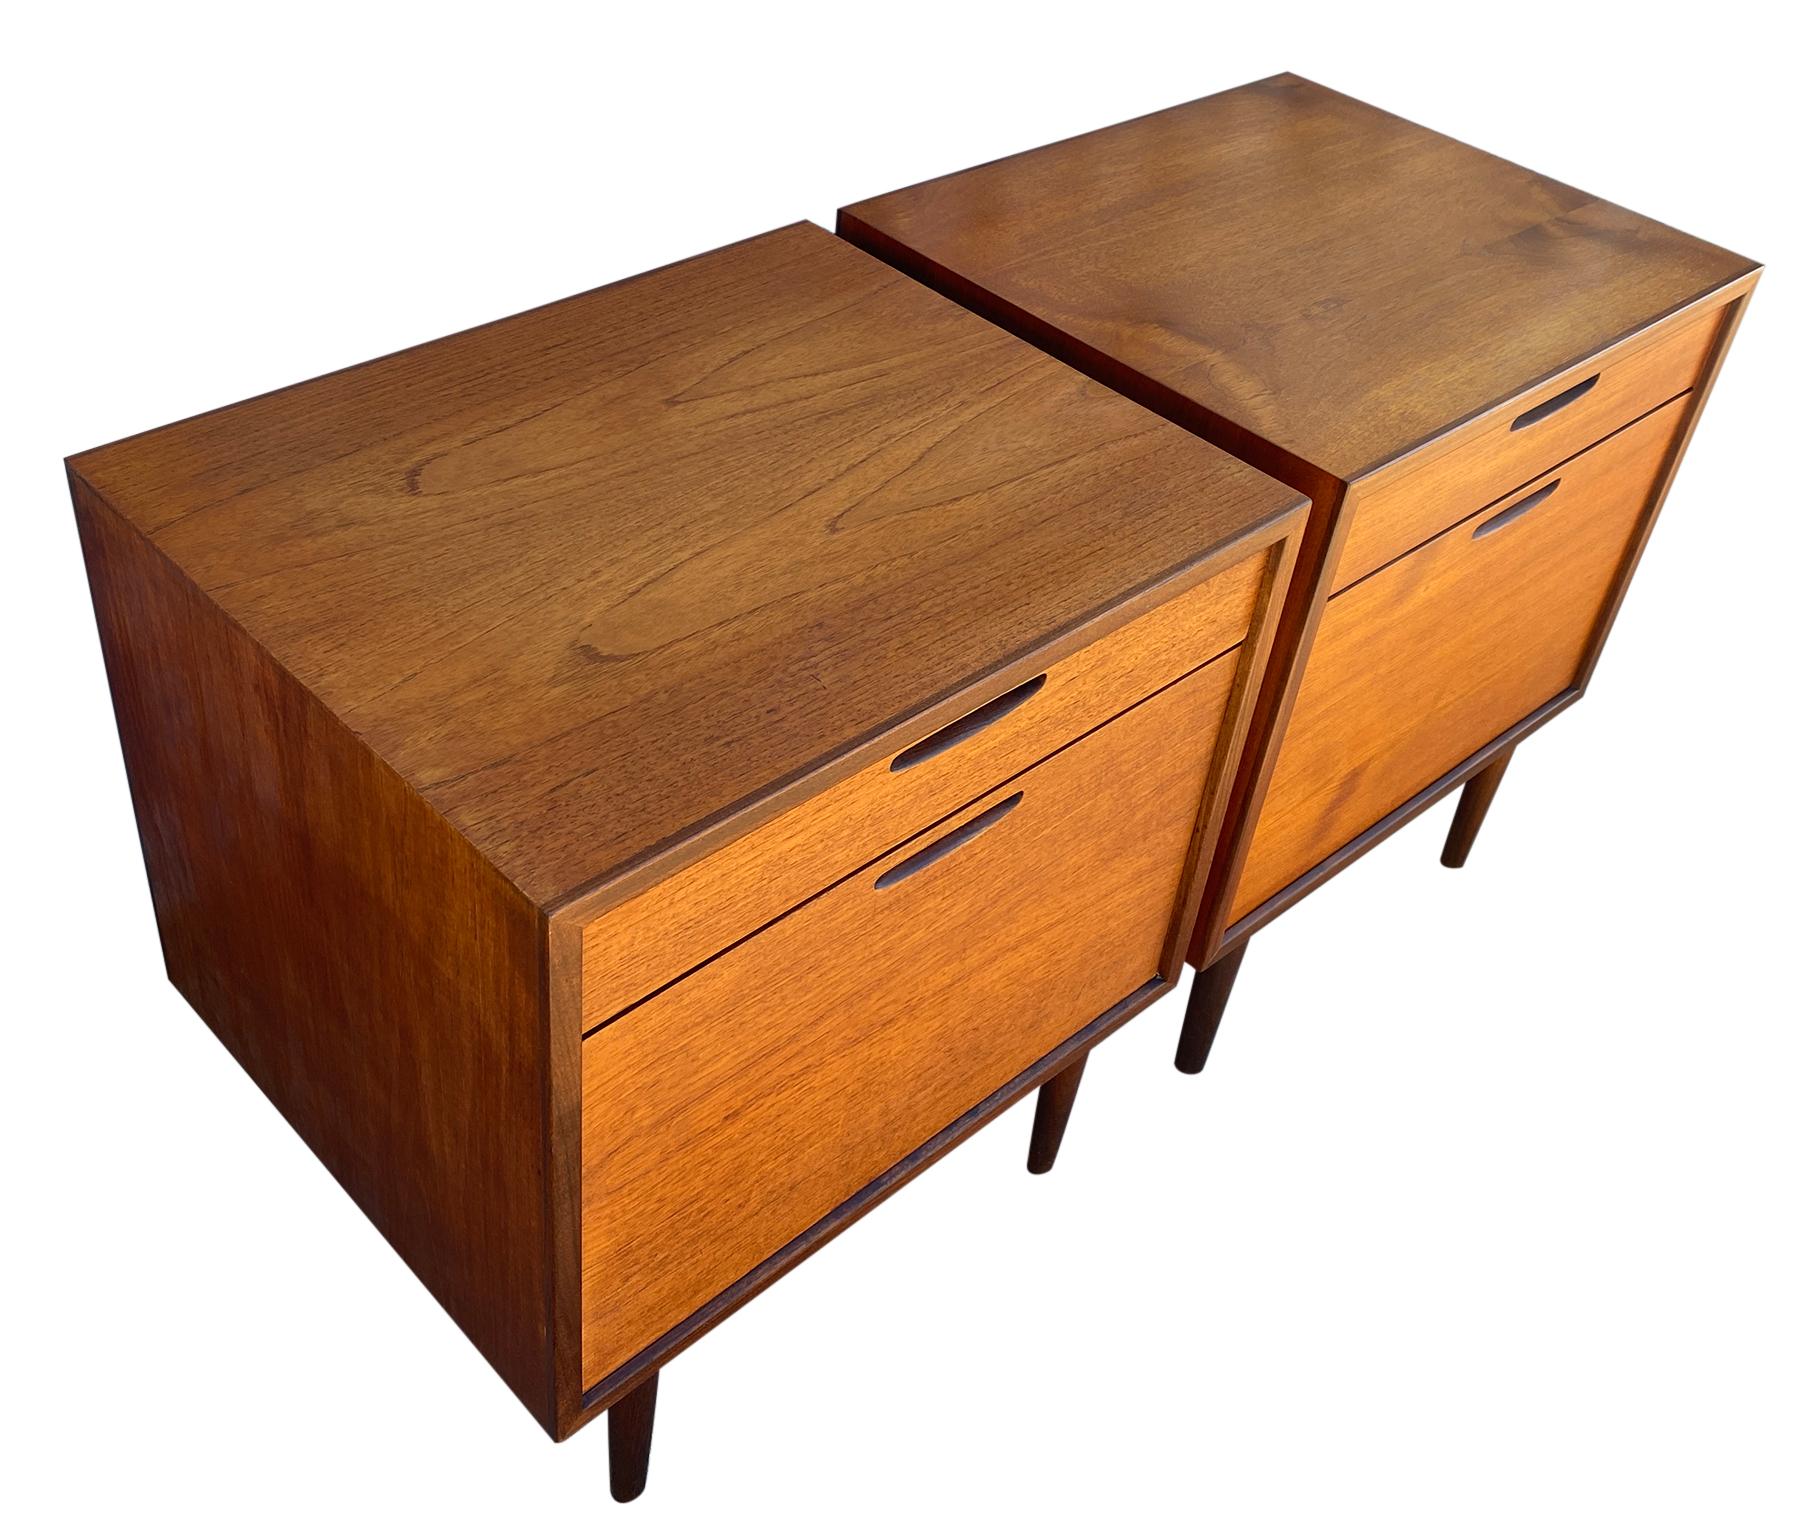 Pair of beautiful single drawer nightstand designed by Ib Kofod-Larsen and manufactured by J. Clausen Brande Møbelfabrik, Denmark, 1960. Very high quality Scandinavian design, superb finished all around and even the teak wooden back. Nice details